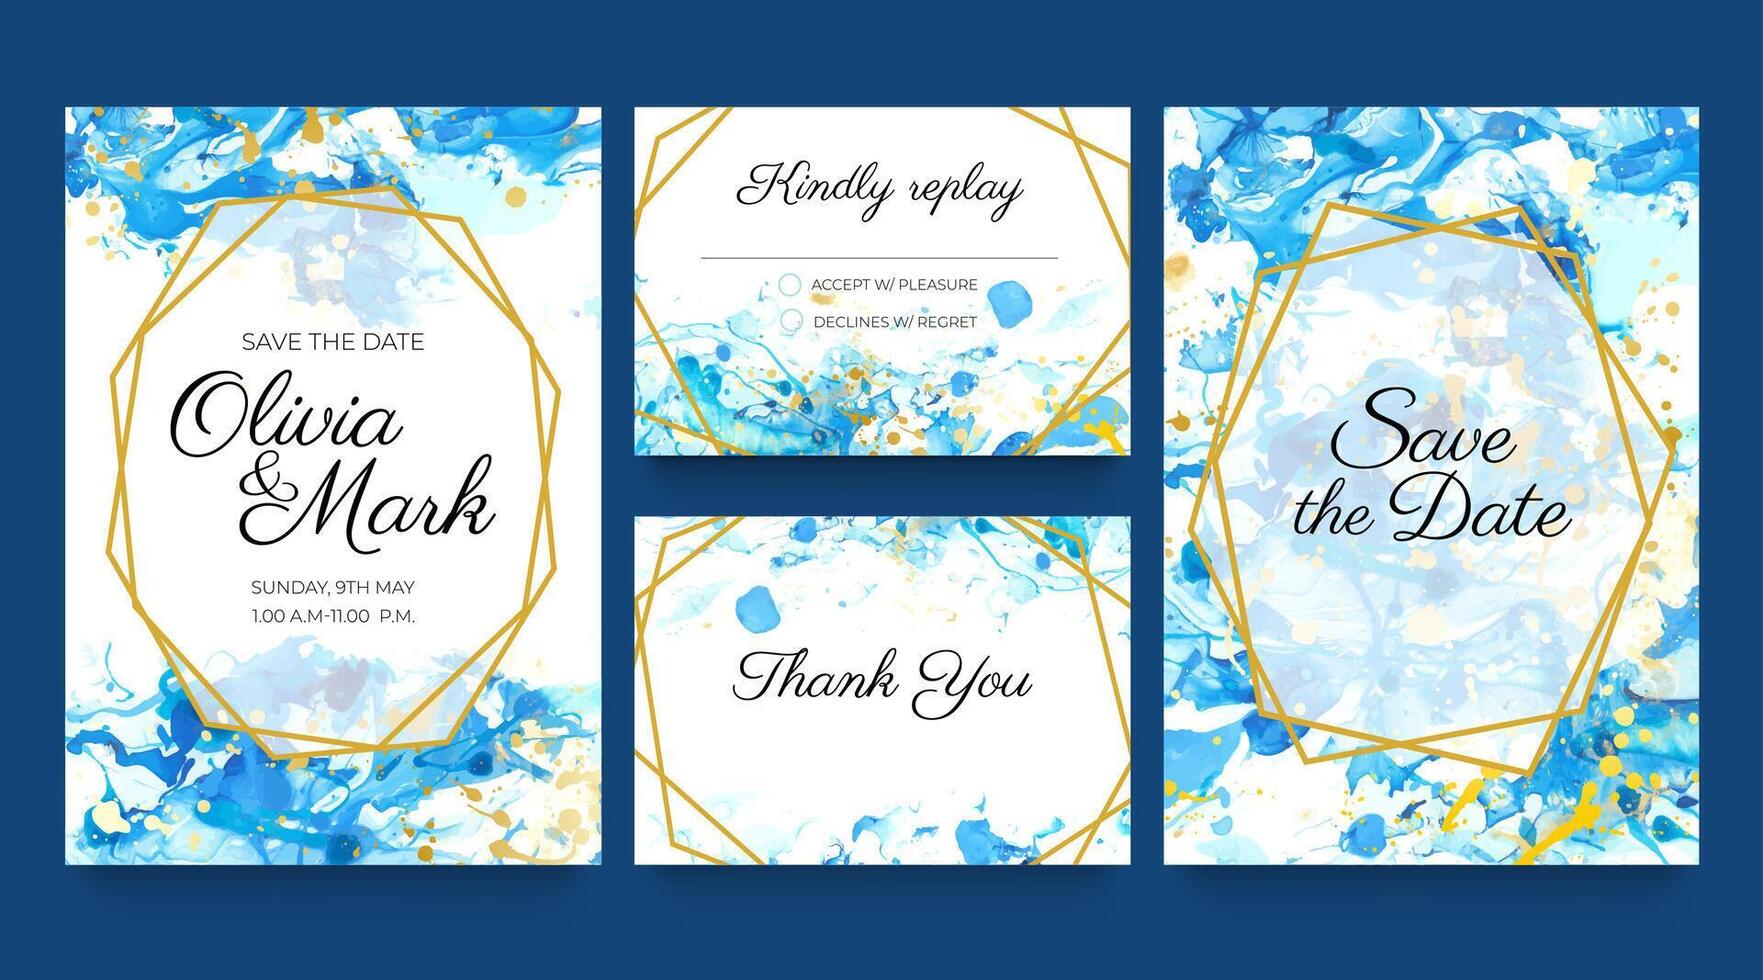 Watercolor wedding invite cards. Blue and gold invitation templates with liquid paint splatters and golden frames. Save the date vector set